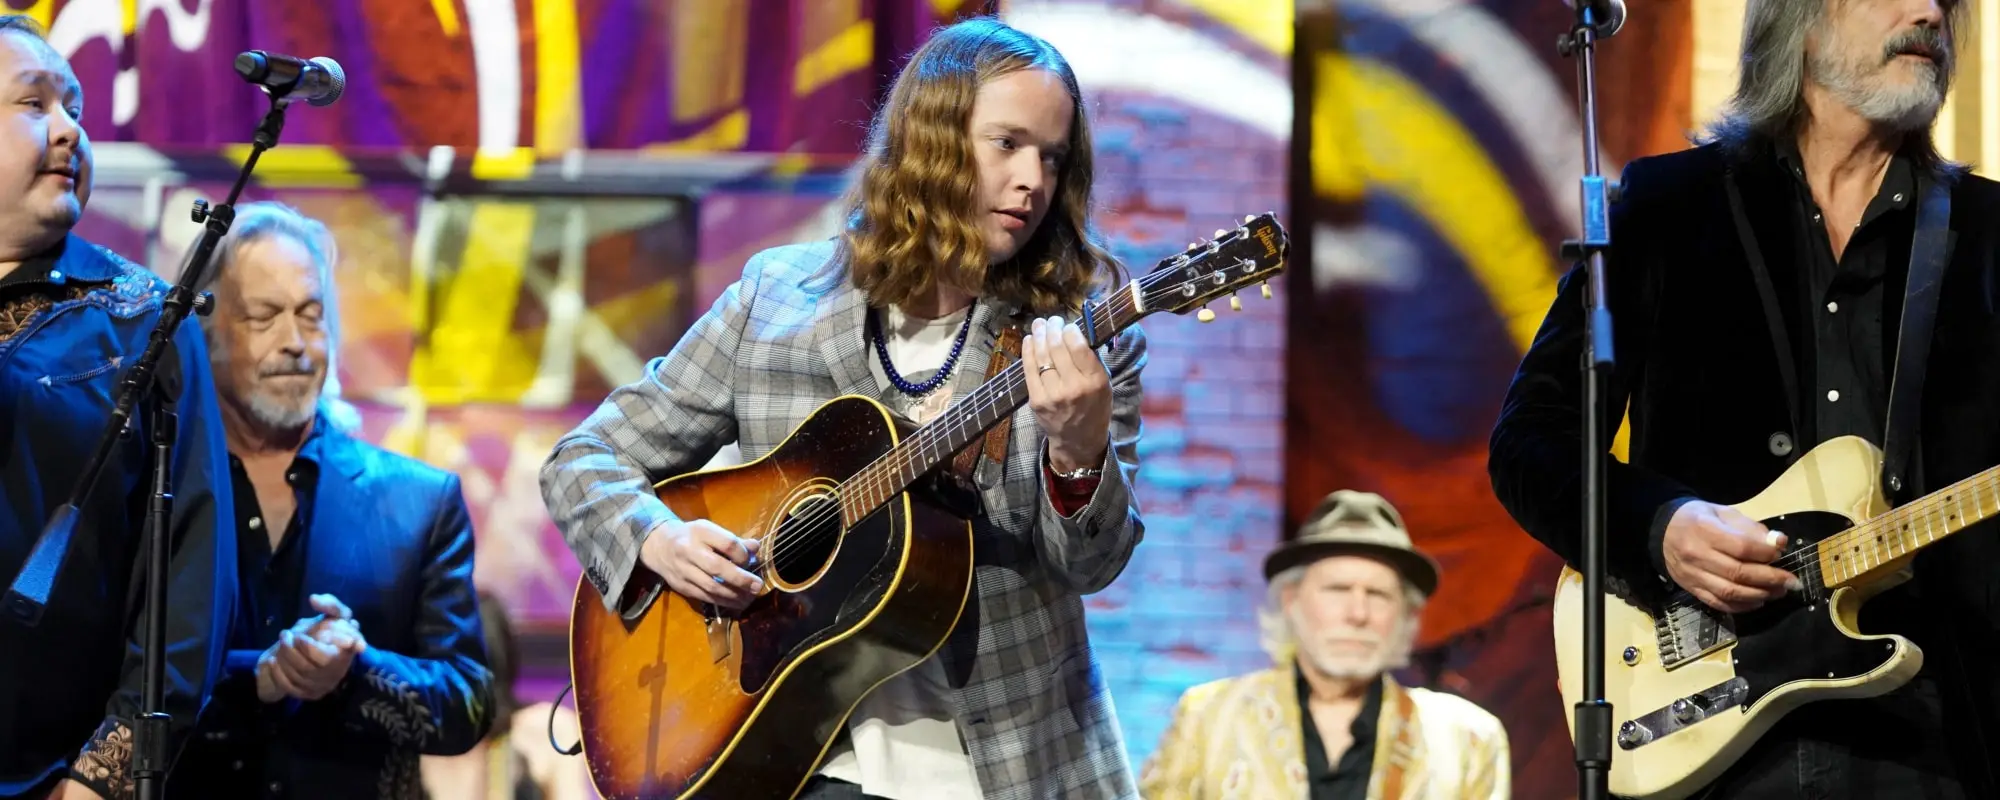 Billy Strings Gets Grungy at the Ryman with Alice in Chains, Nirvana Covers